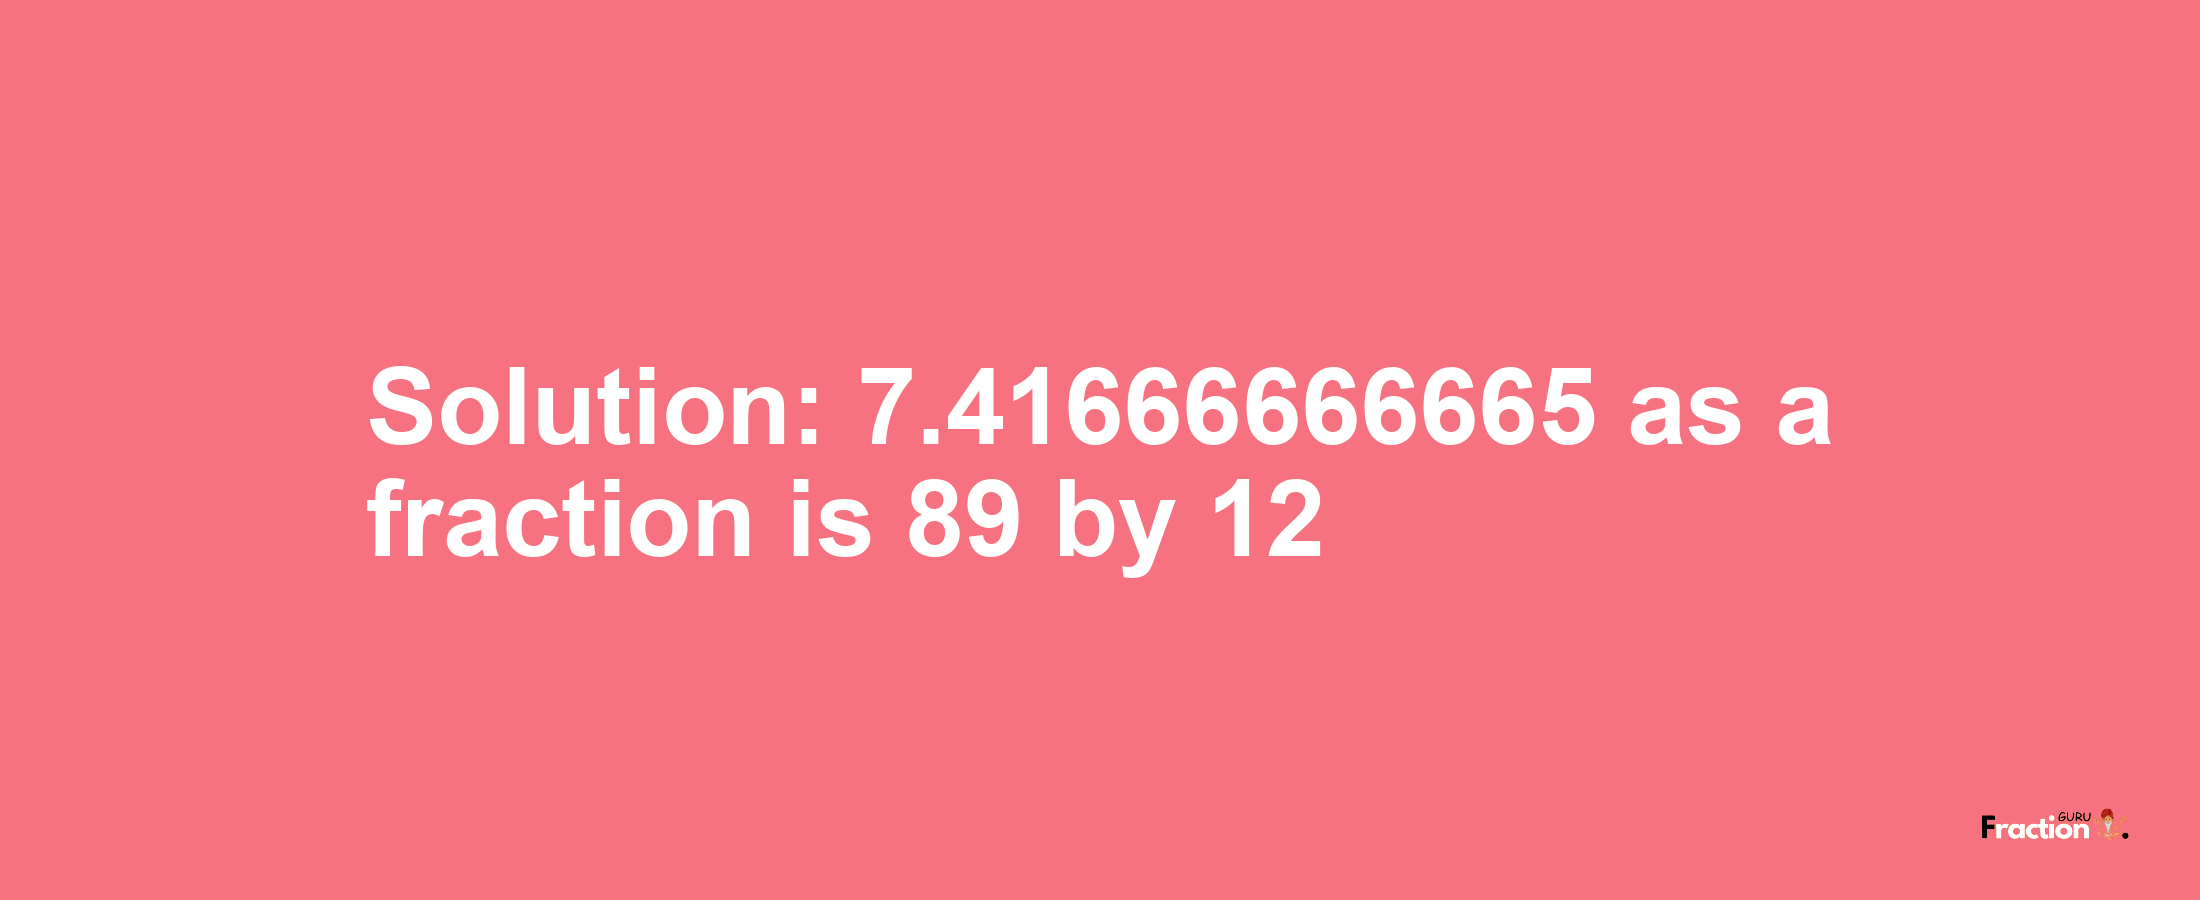 Solution:7.41666666665 as a fraction is 89/12